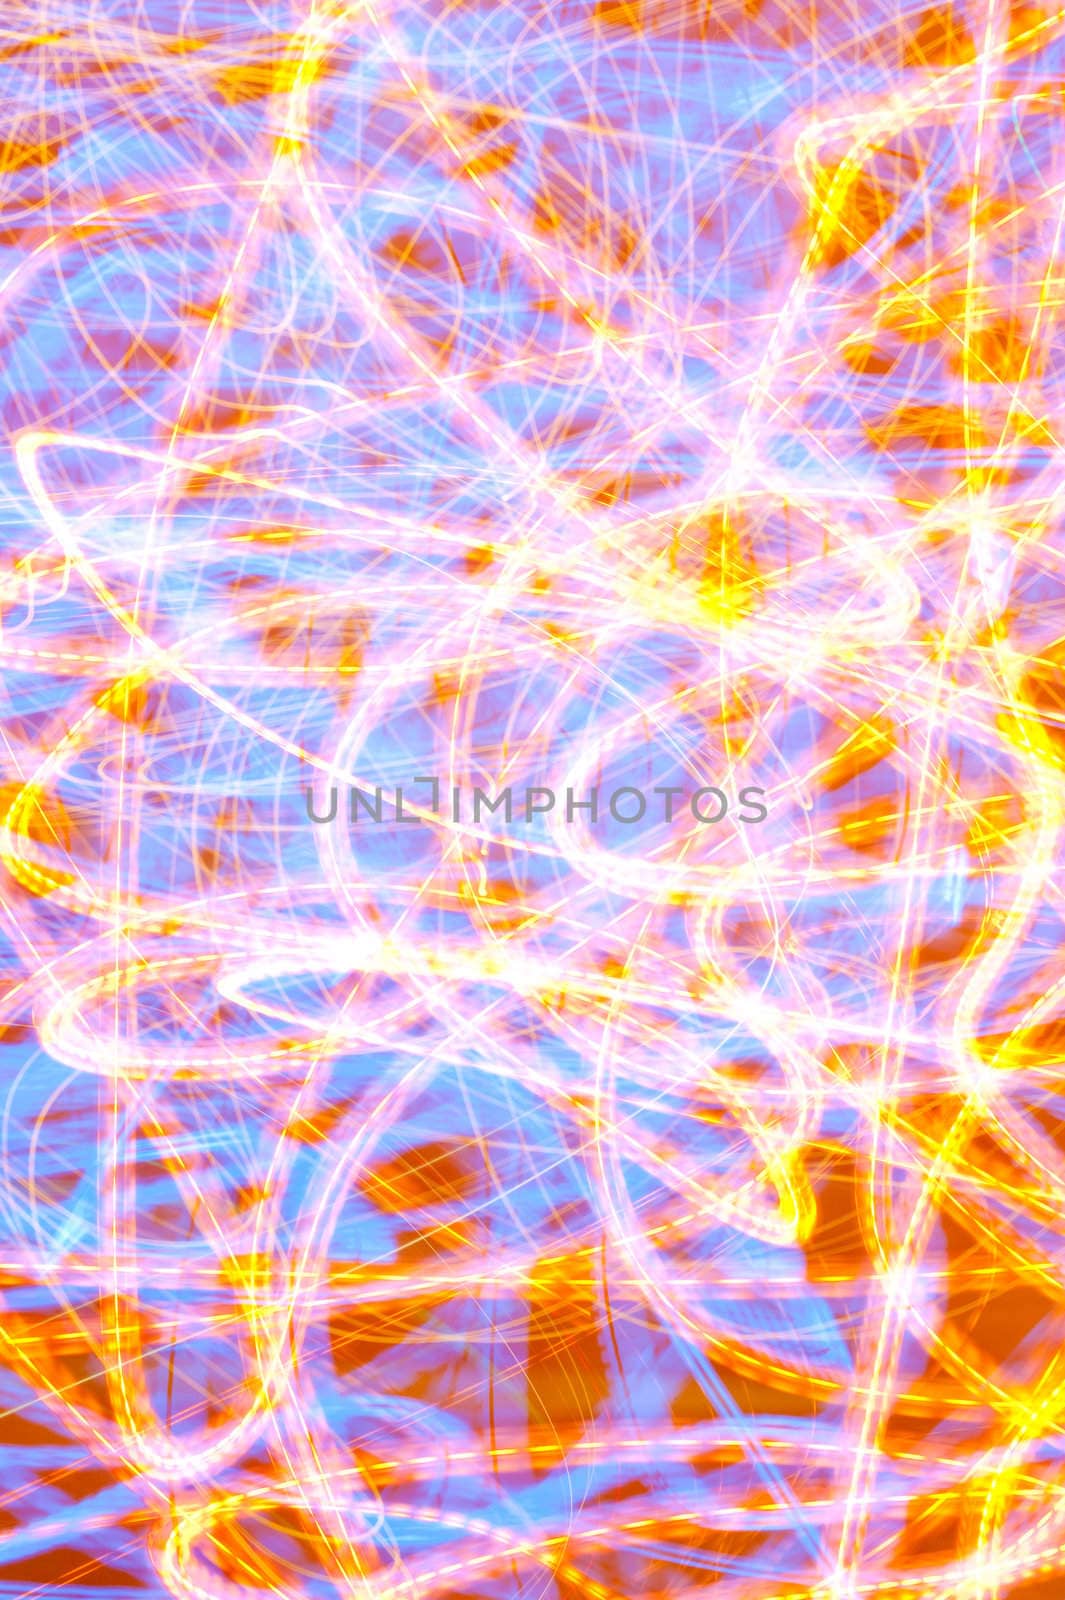 Abstract multicolored image, good as background or design element. 